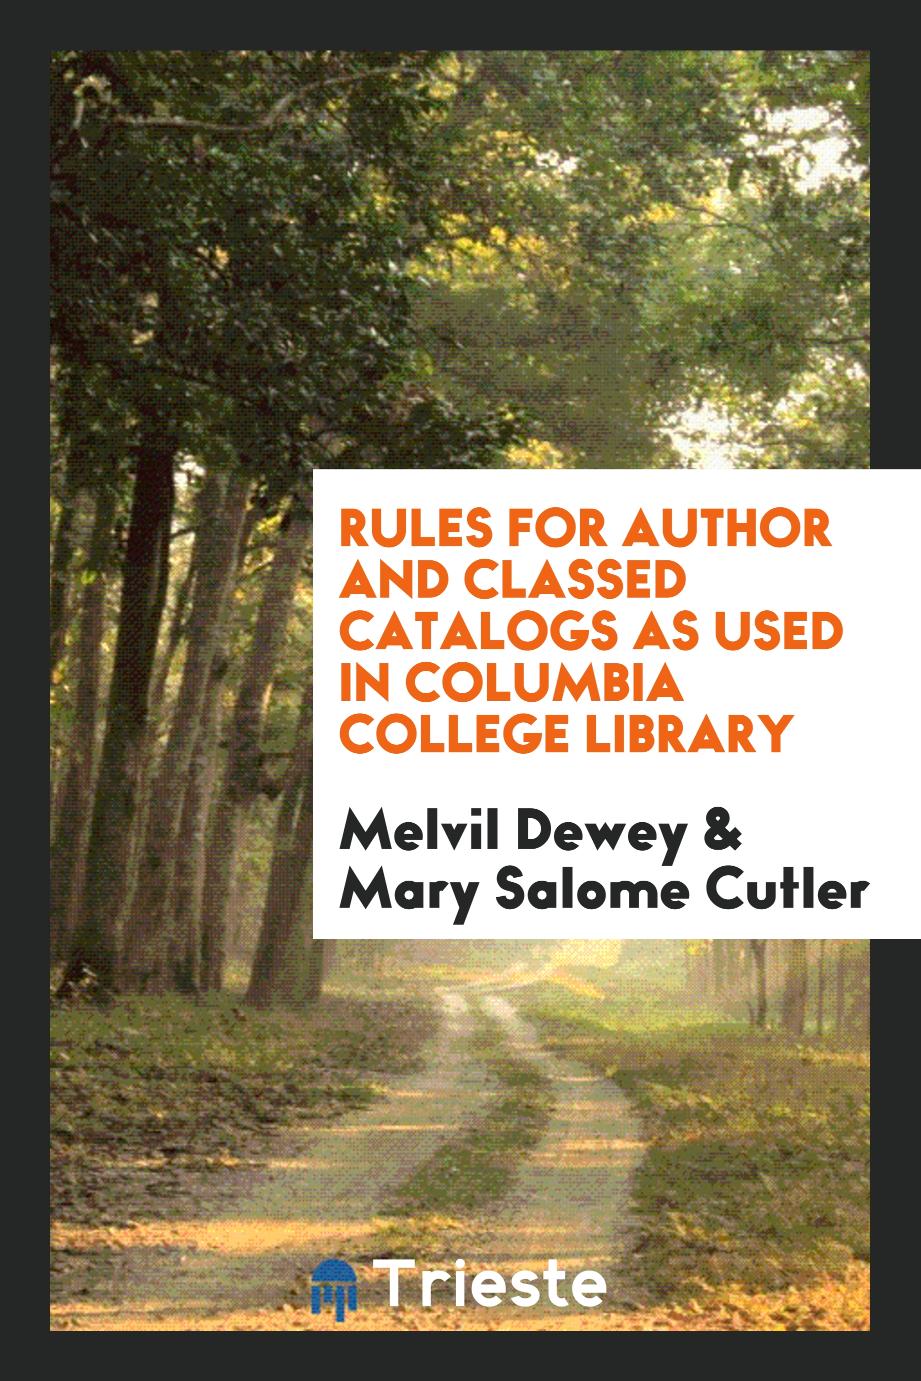 Rules for Author and Classed Catalogs as Used in Columbia College Library